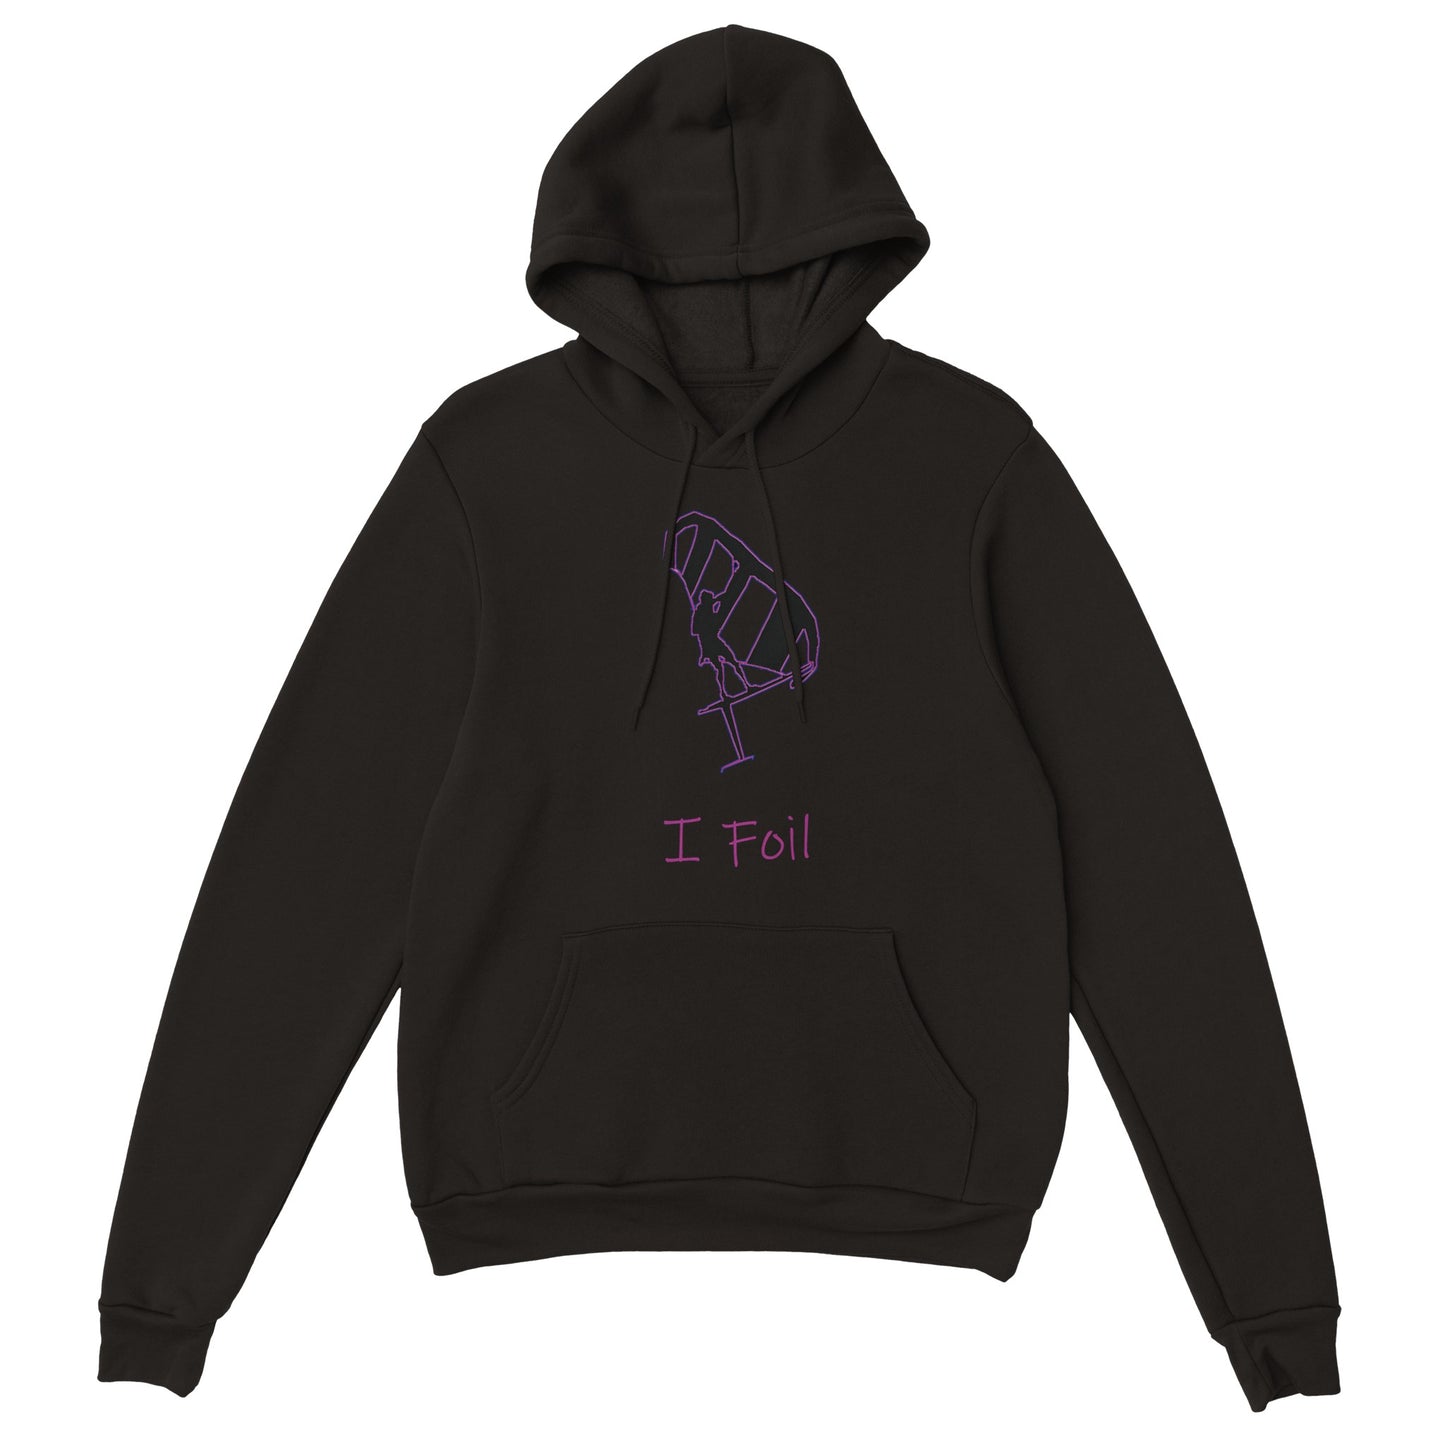 I Foil || Classic Pullover Hoodie